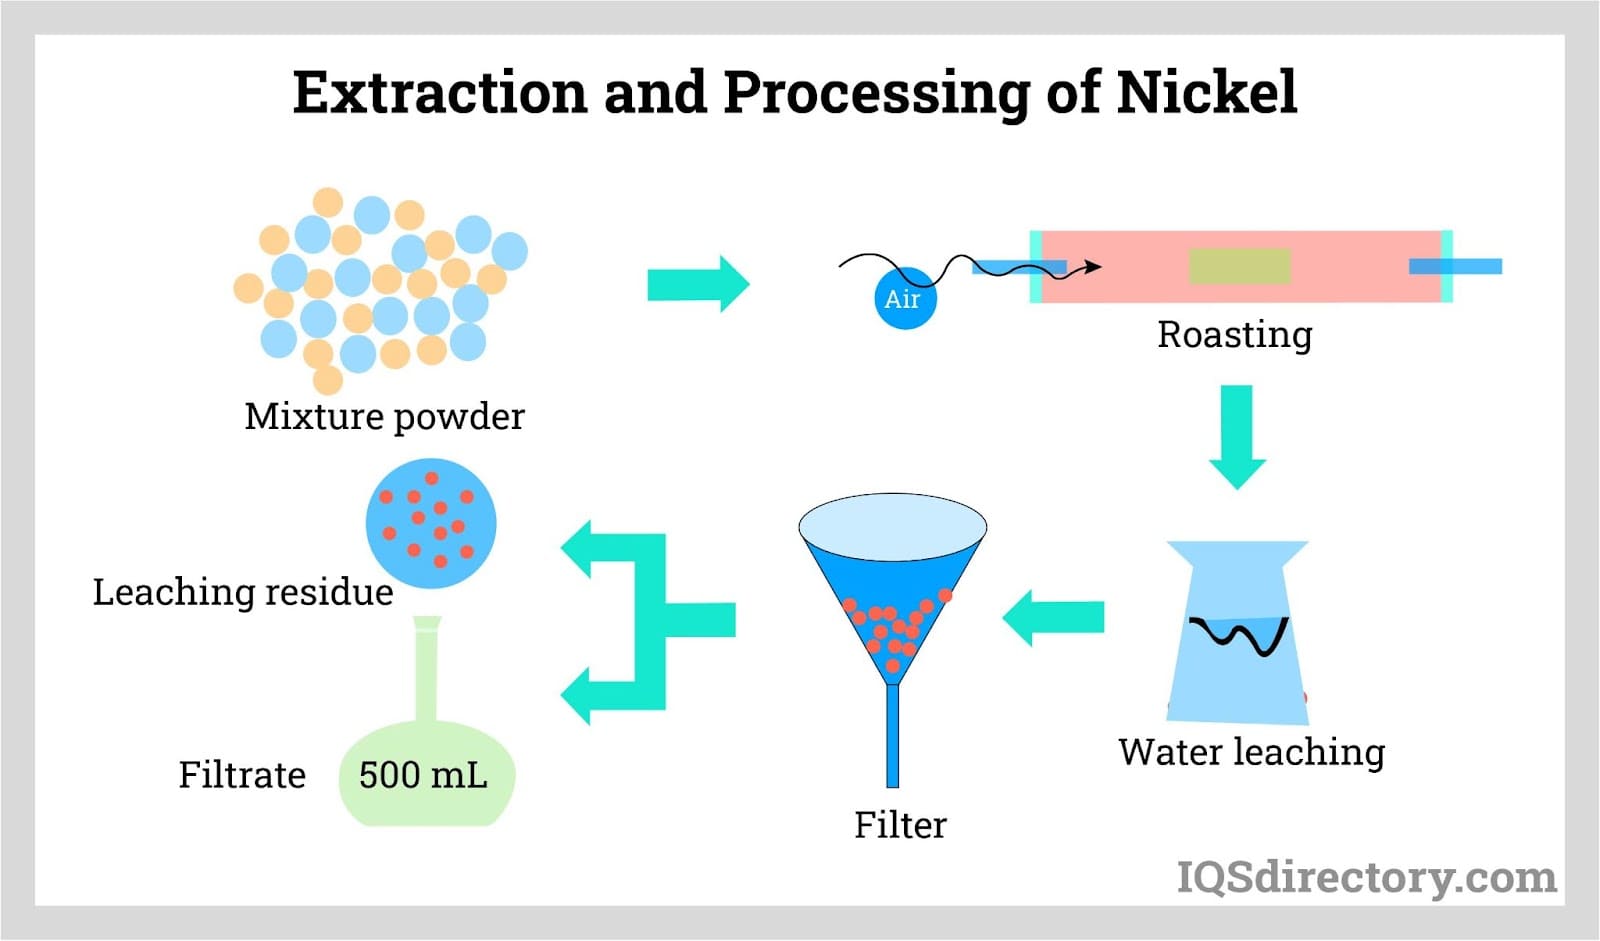 Extraction and Processing of Nickel